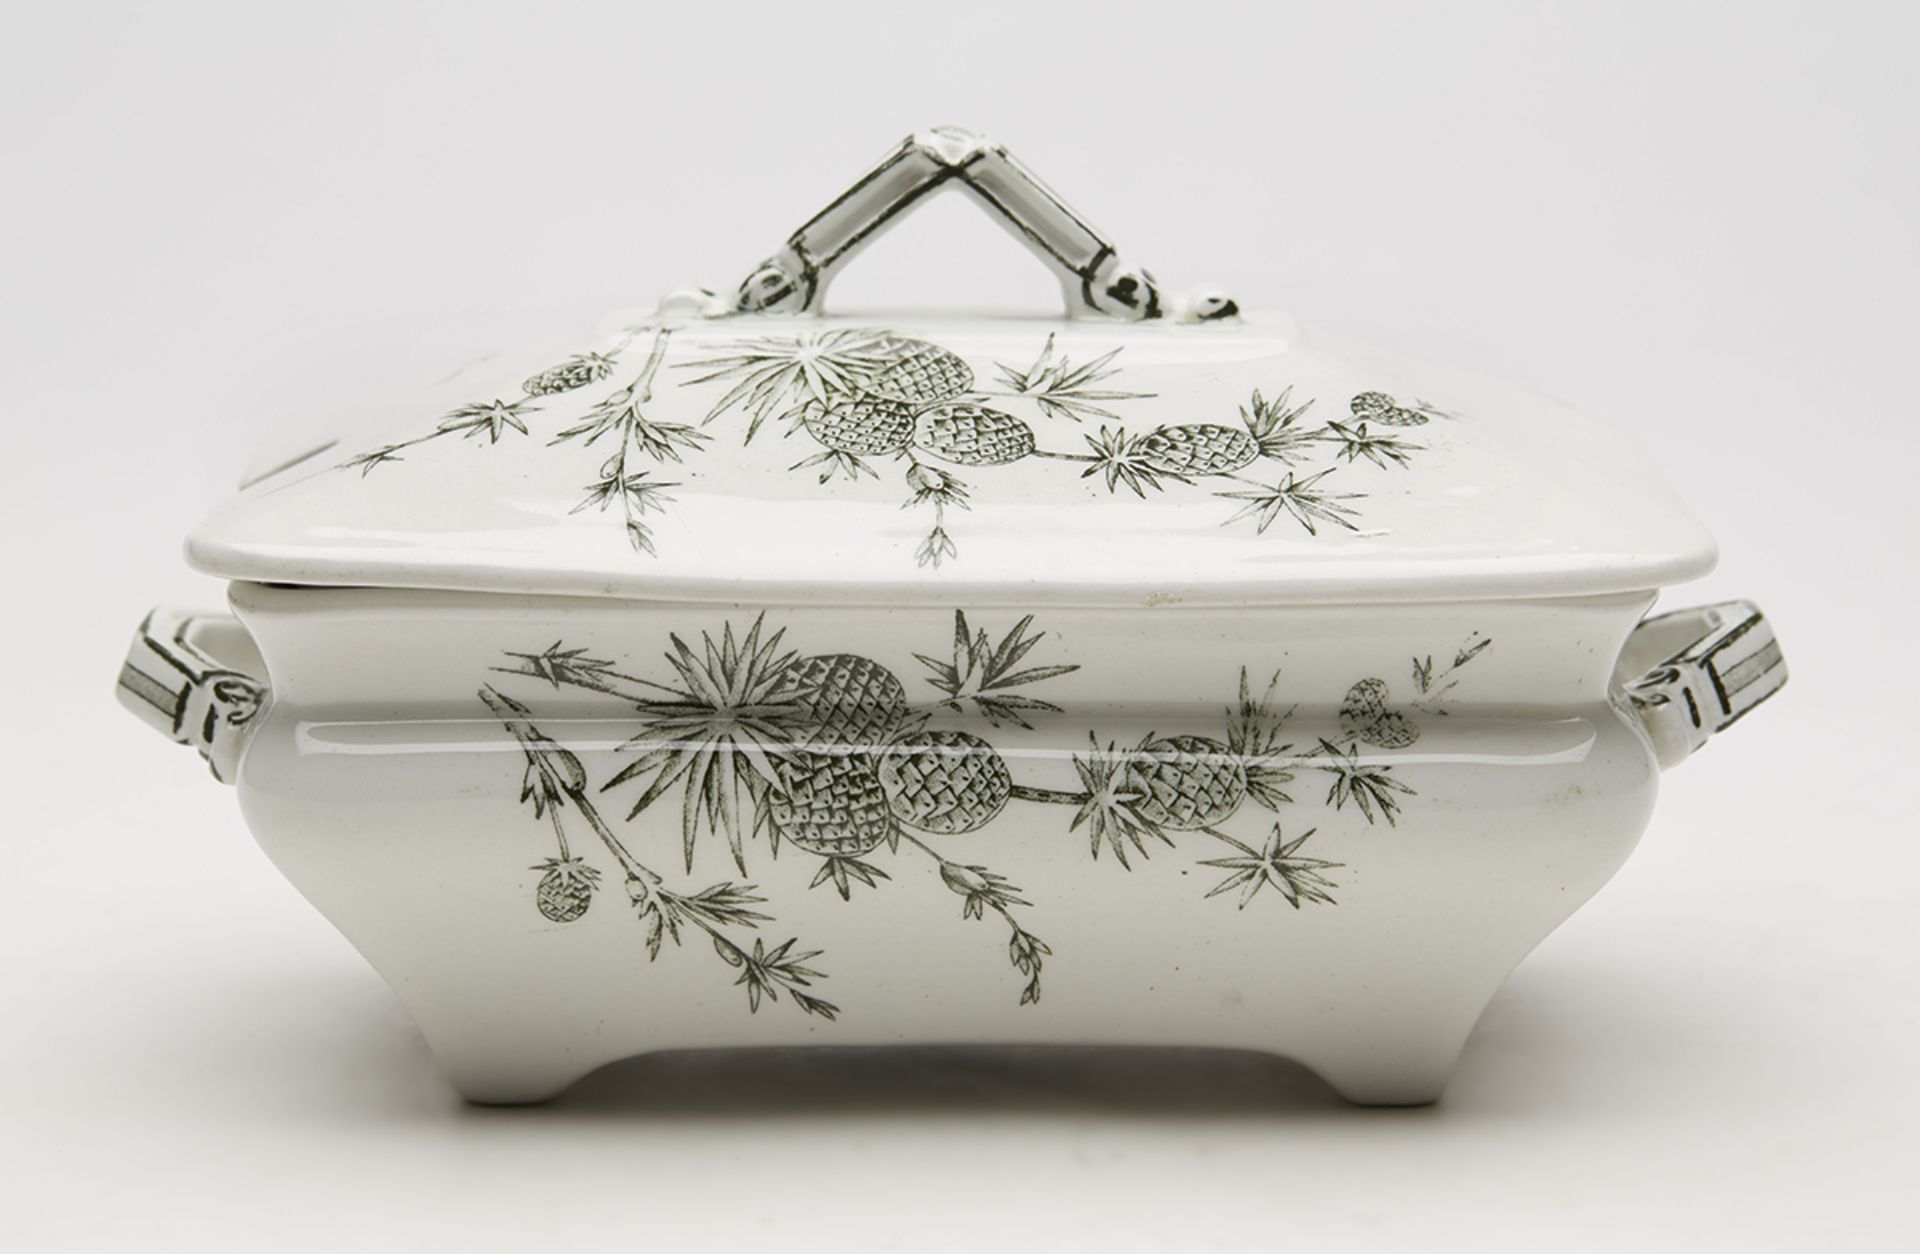 AESTHETIC MOVEMENT RIDGWAYS PINE CONE CENIS SAUCE BOAT 1871   DIMENSIONS   Height 11cm, Length 18, - Image 5 of 8